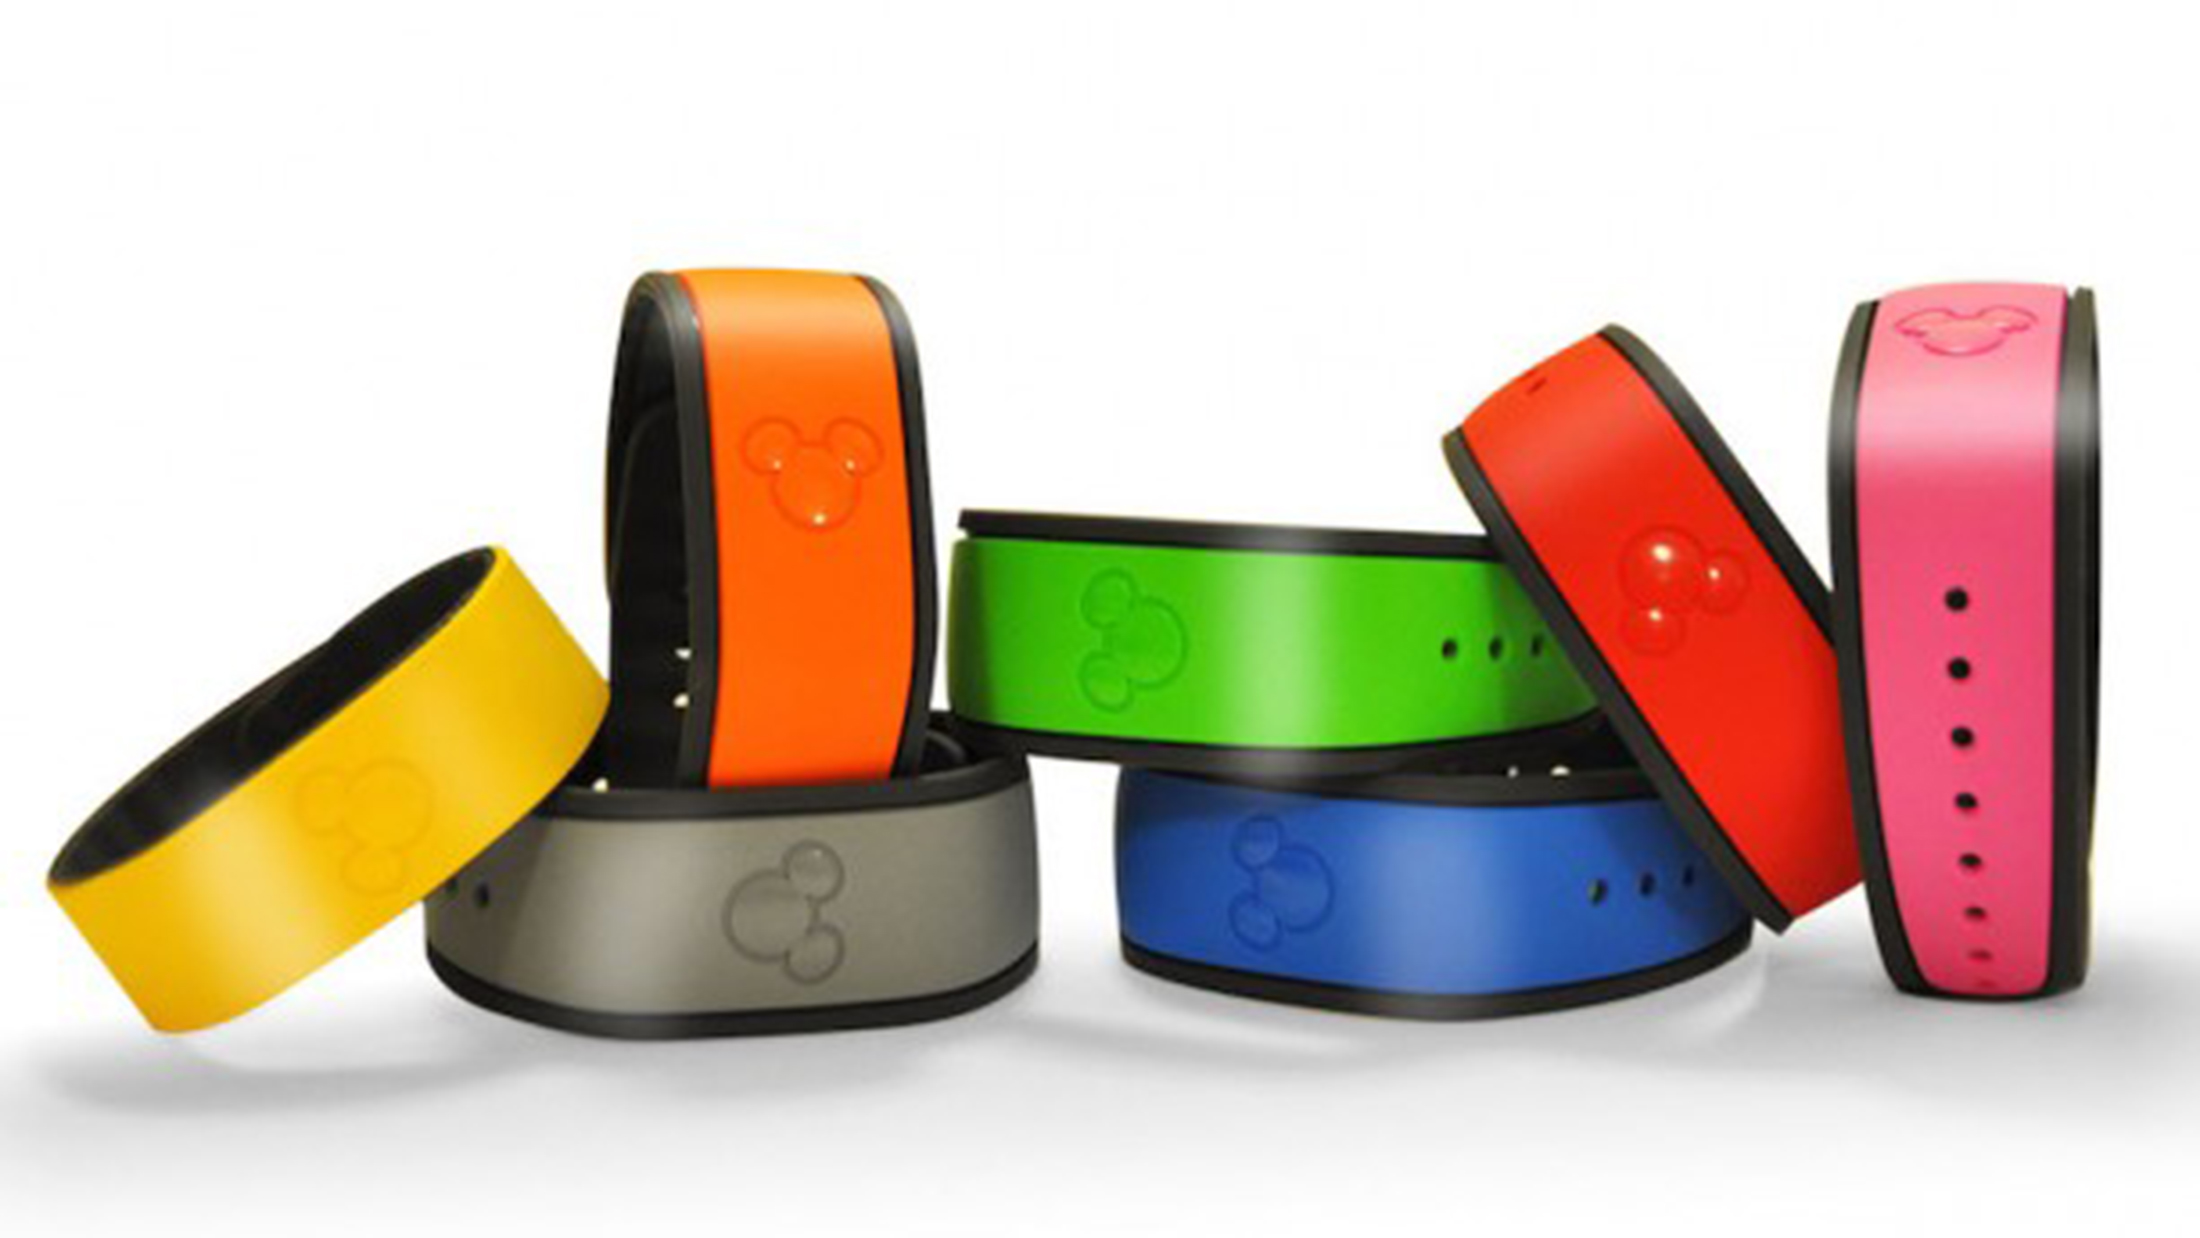 New MagicBand upgrade options are now available